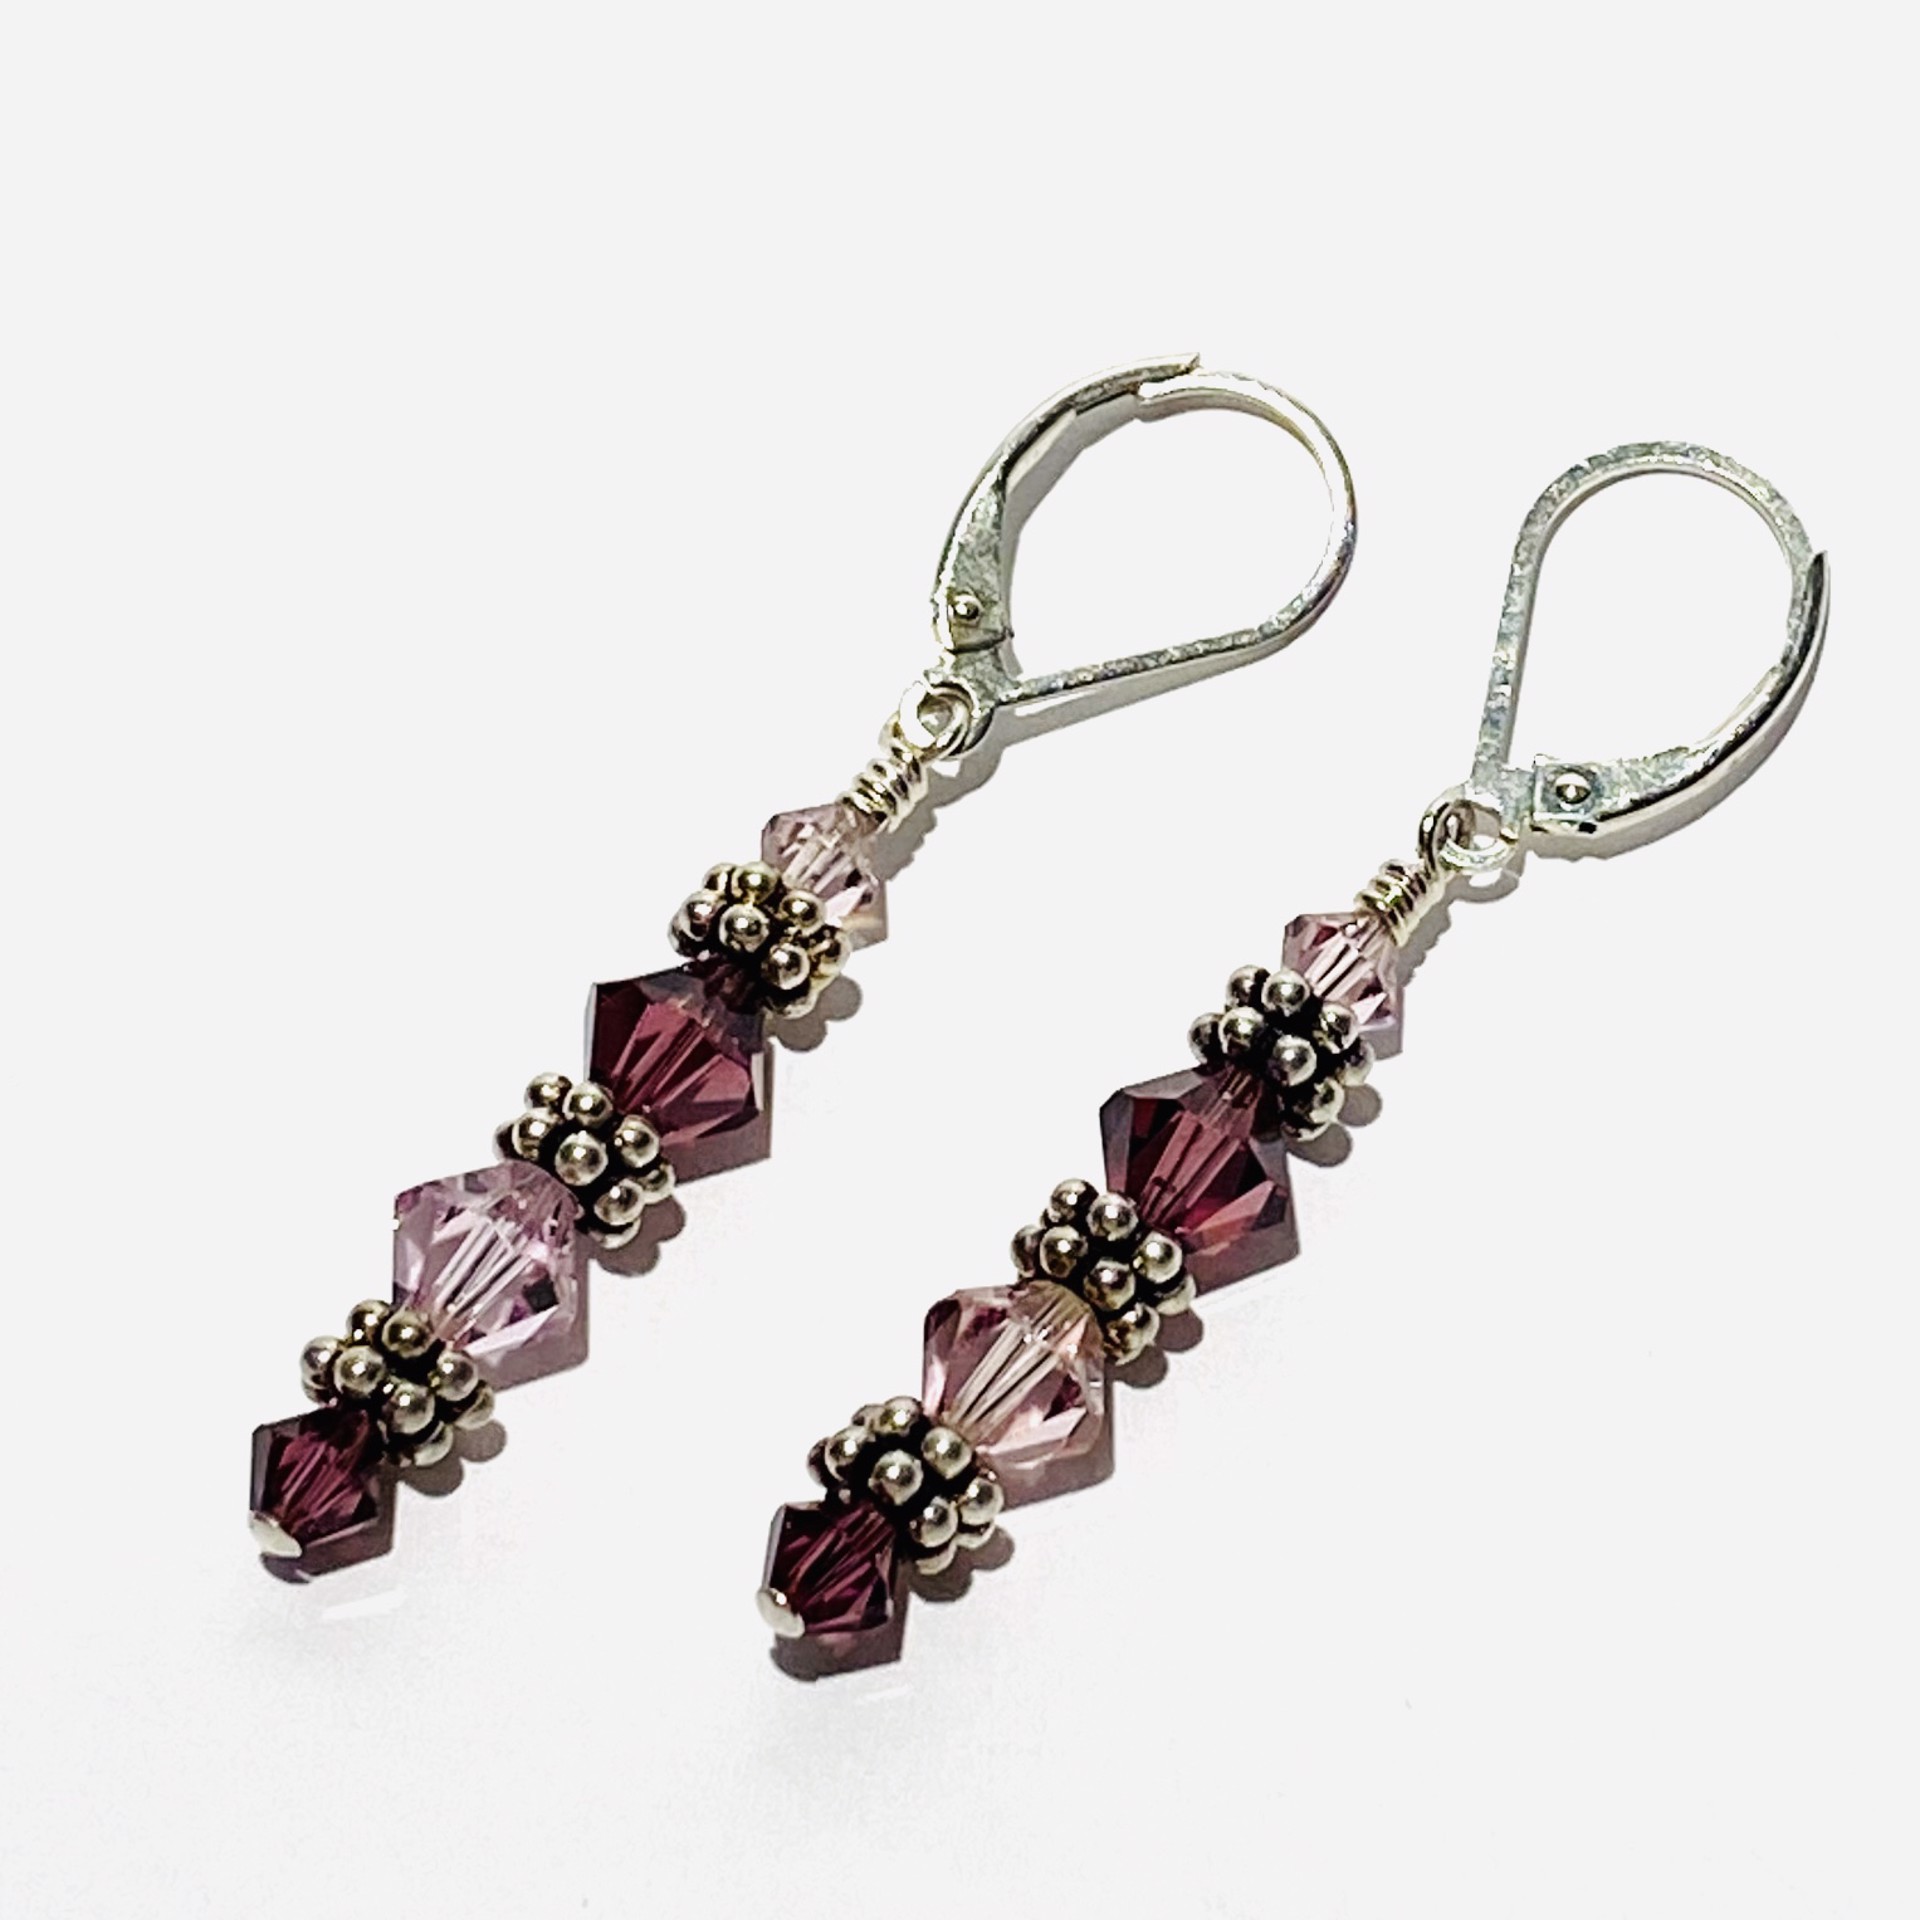 Crystal and Silver Earrings SHOSH20-7 by Shoshannah Weinisch